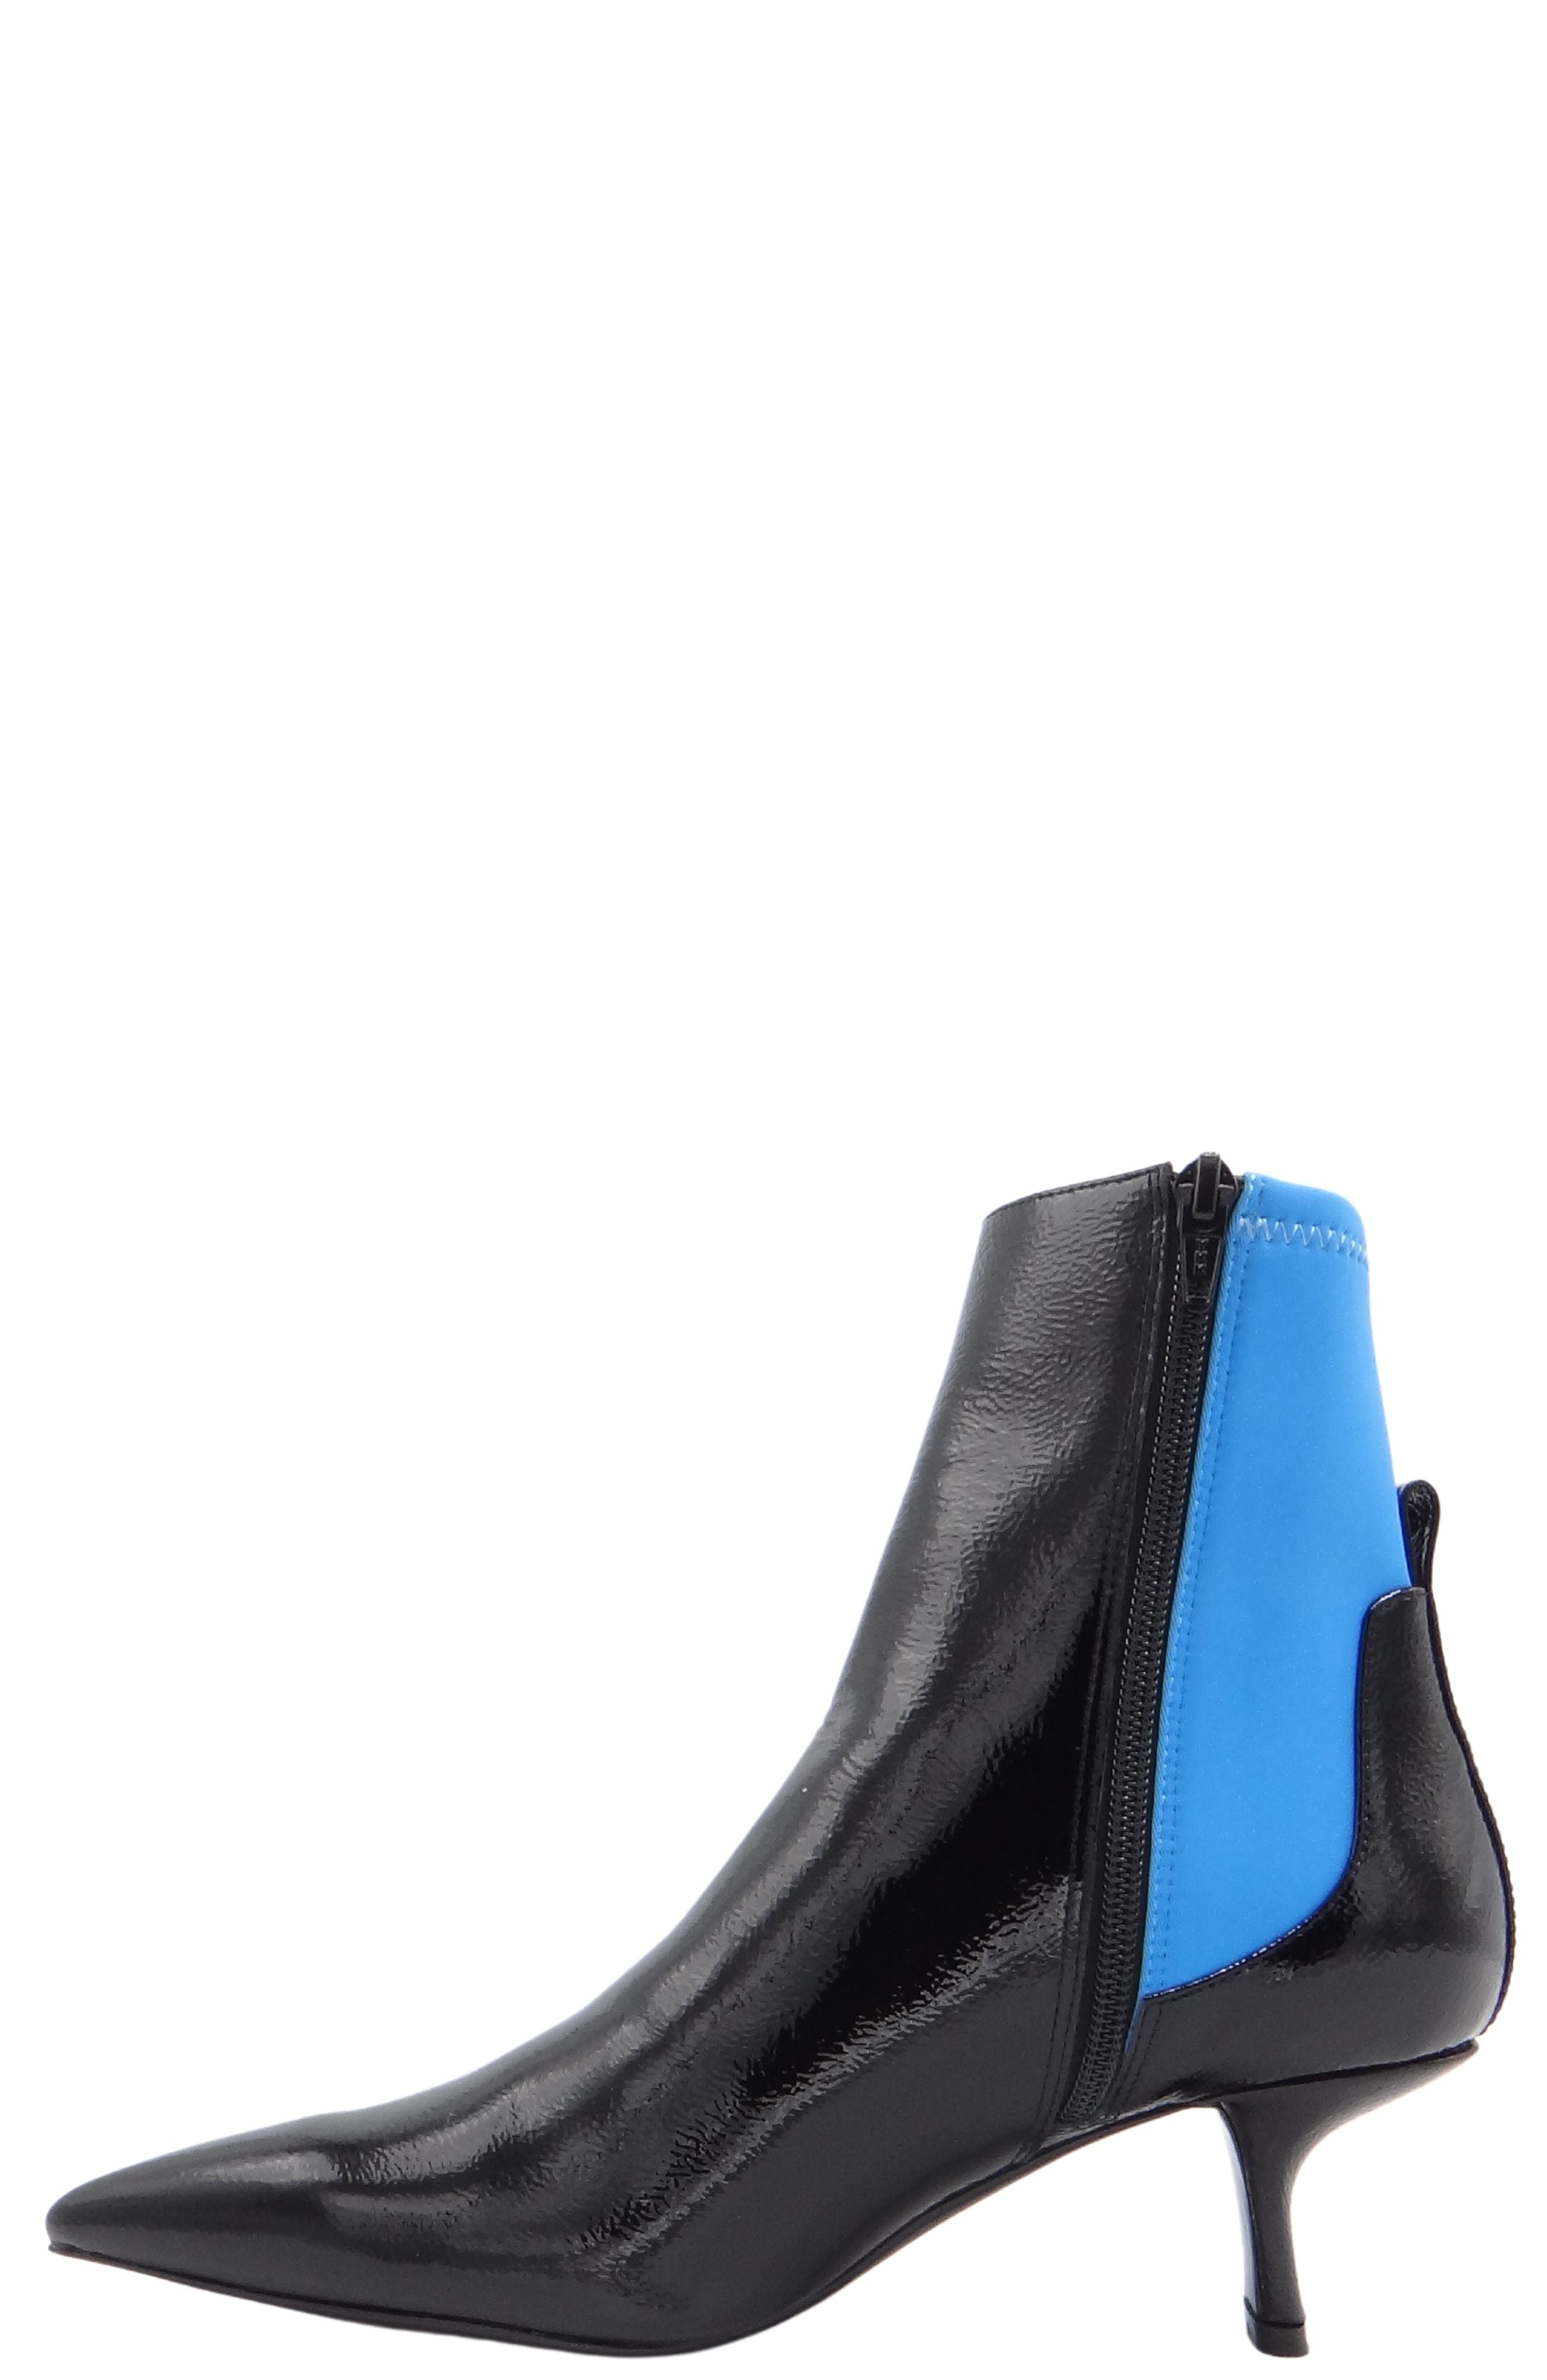 CAVERLEY Romi Boot in Azure 22F608C Black Crinkle/Azure FROM EIGHTYWINGOLD - OFFICIAL BRAND PARTNER